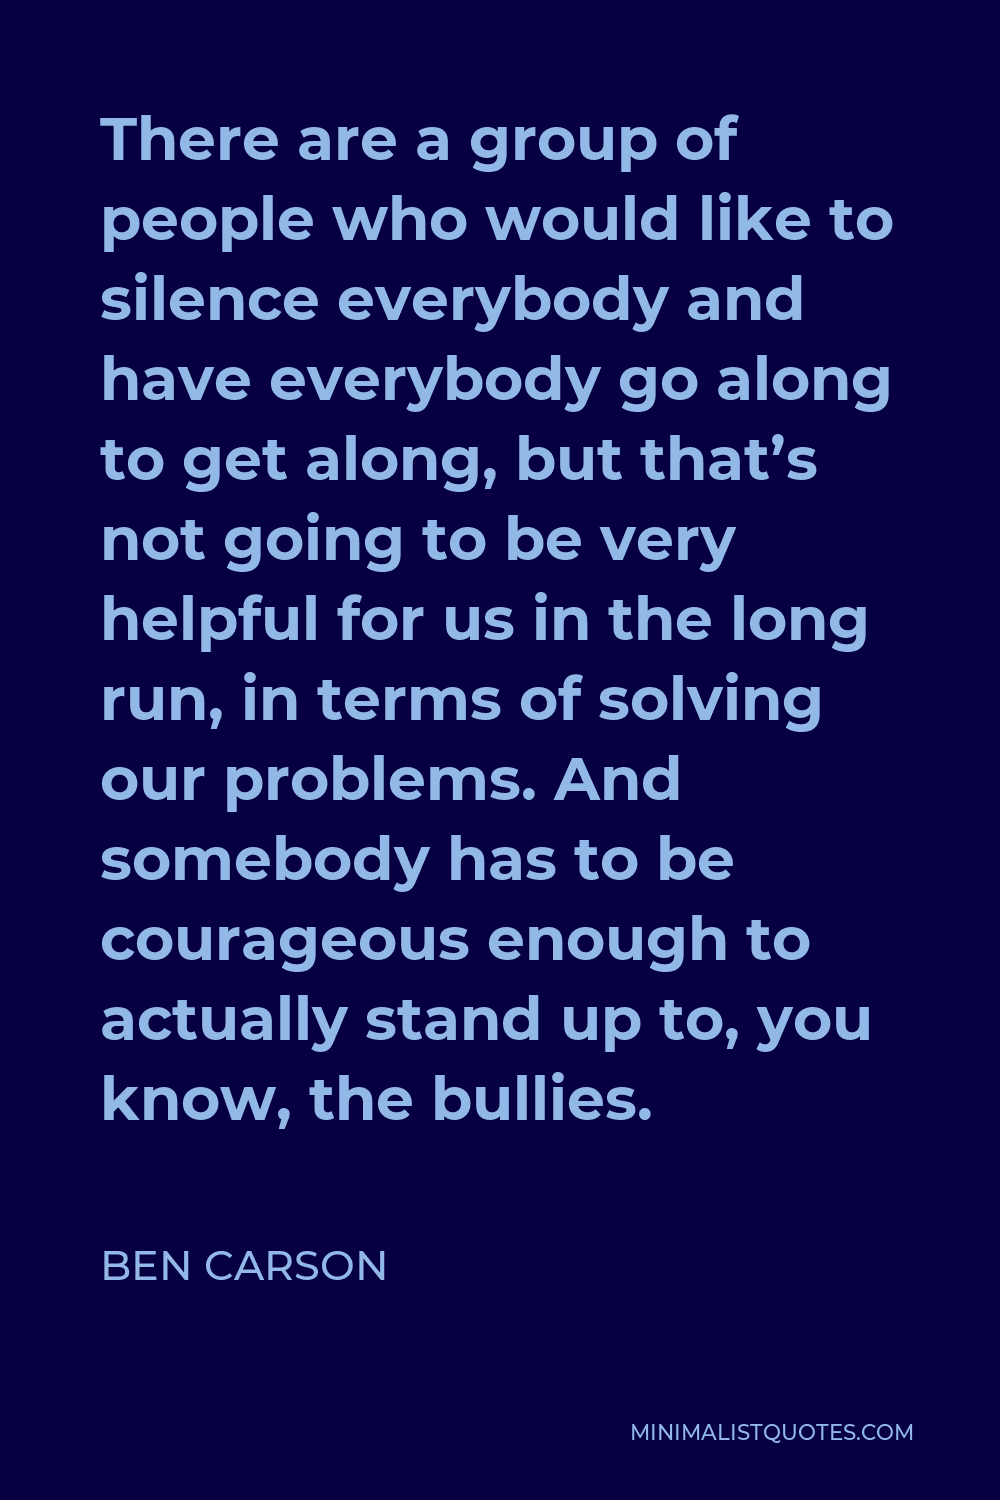 Ben Carson Quote - There are a group of people who would like to silence everybody and have everybody go along to get along, but that’s not going to be very helpful for us in the long run, in terms of solving our problems. And somebody has to be courageous enough to actually stand up to, you know, the bullies.